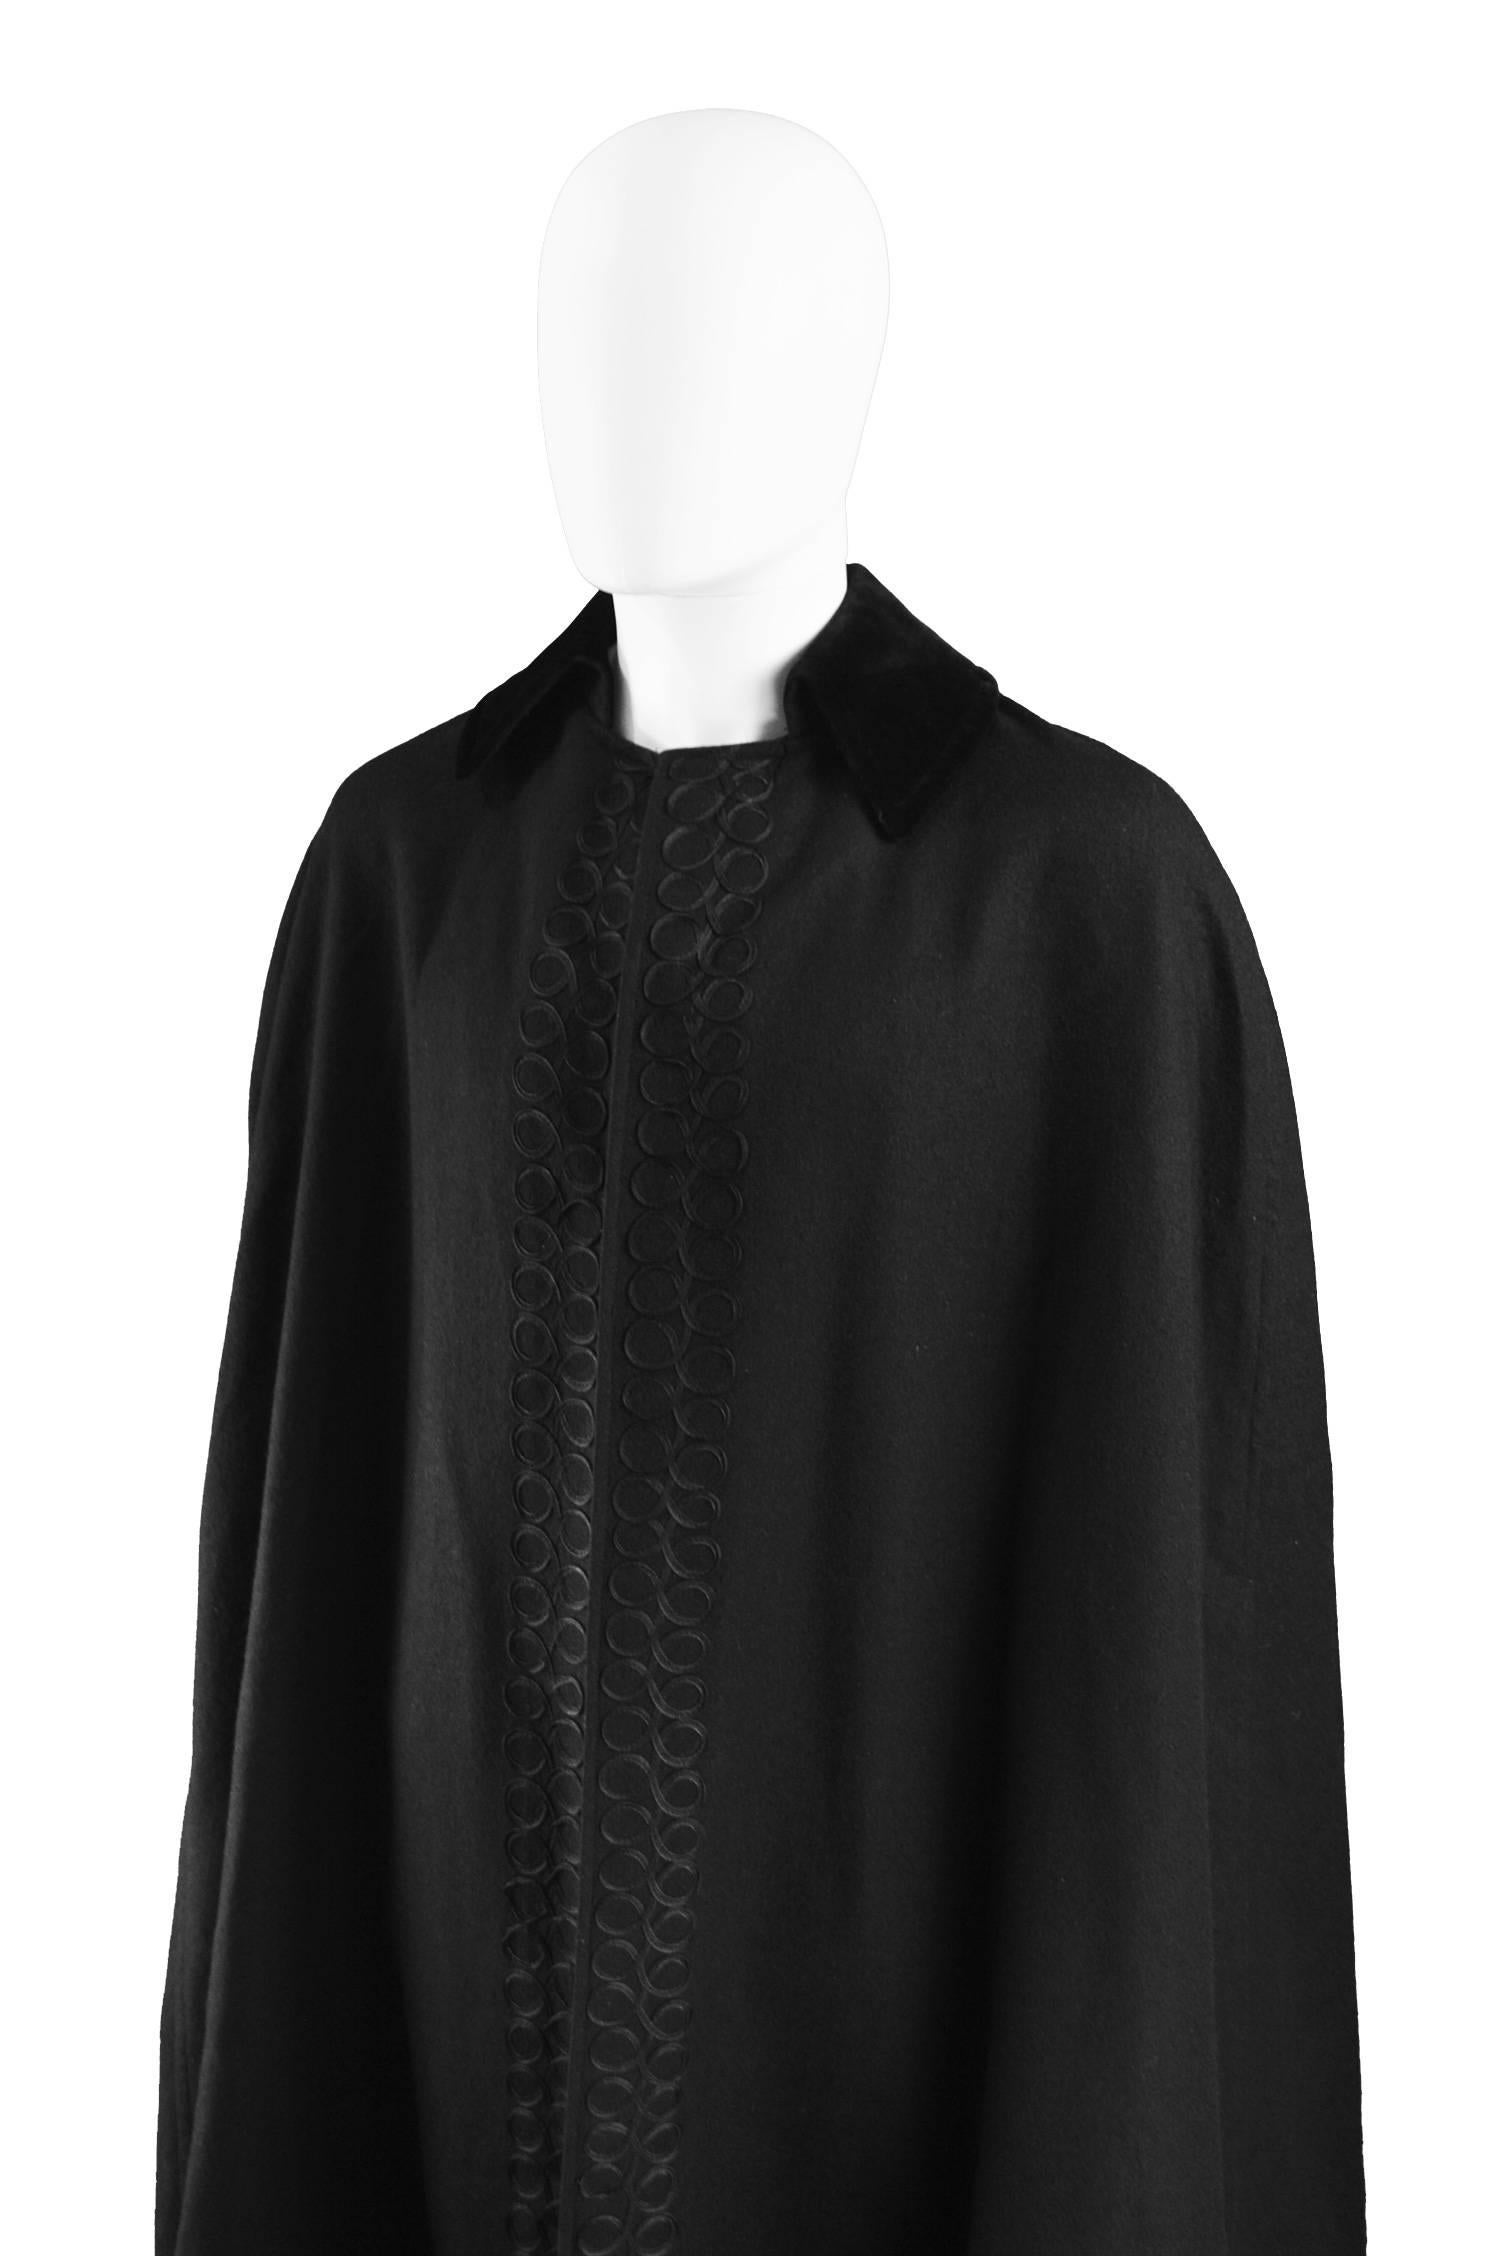 Vintage Men's Black Wool Cape with Velvet Collar by Scott Lester, 1960s In Excellent Condition For Sale In Doncaster, South Yorkshire